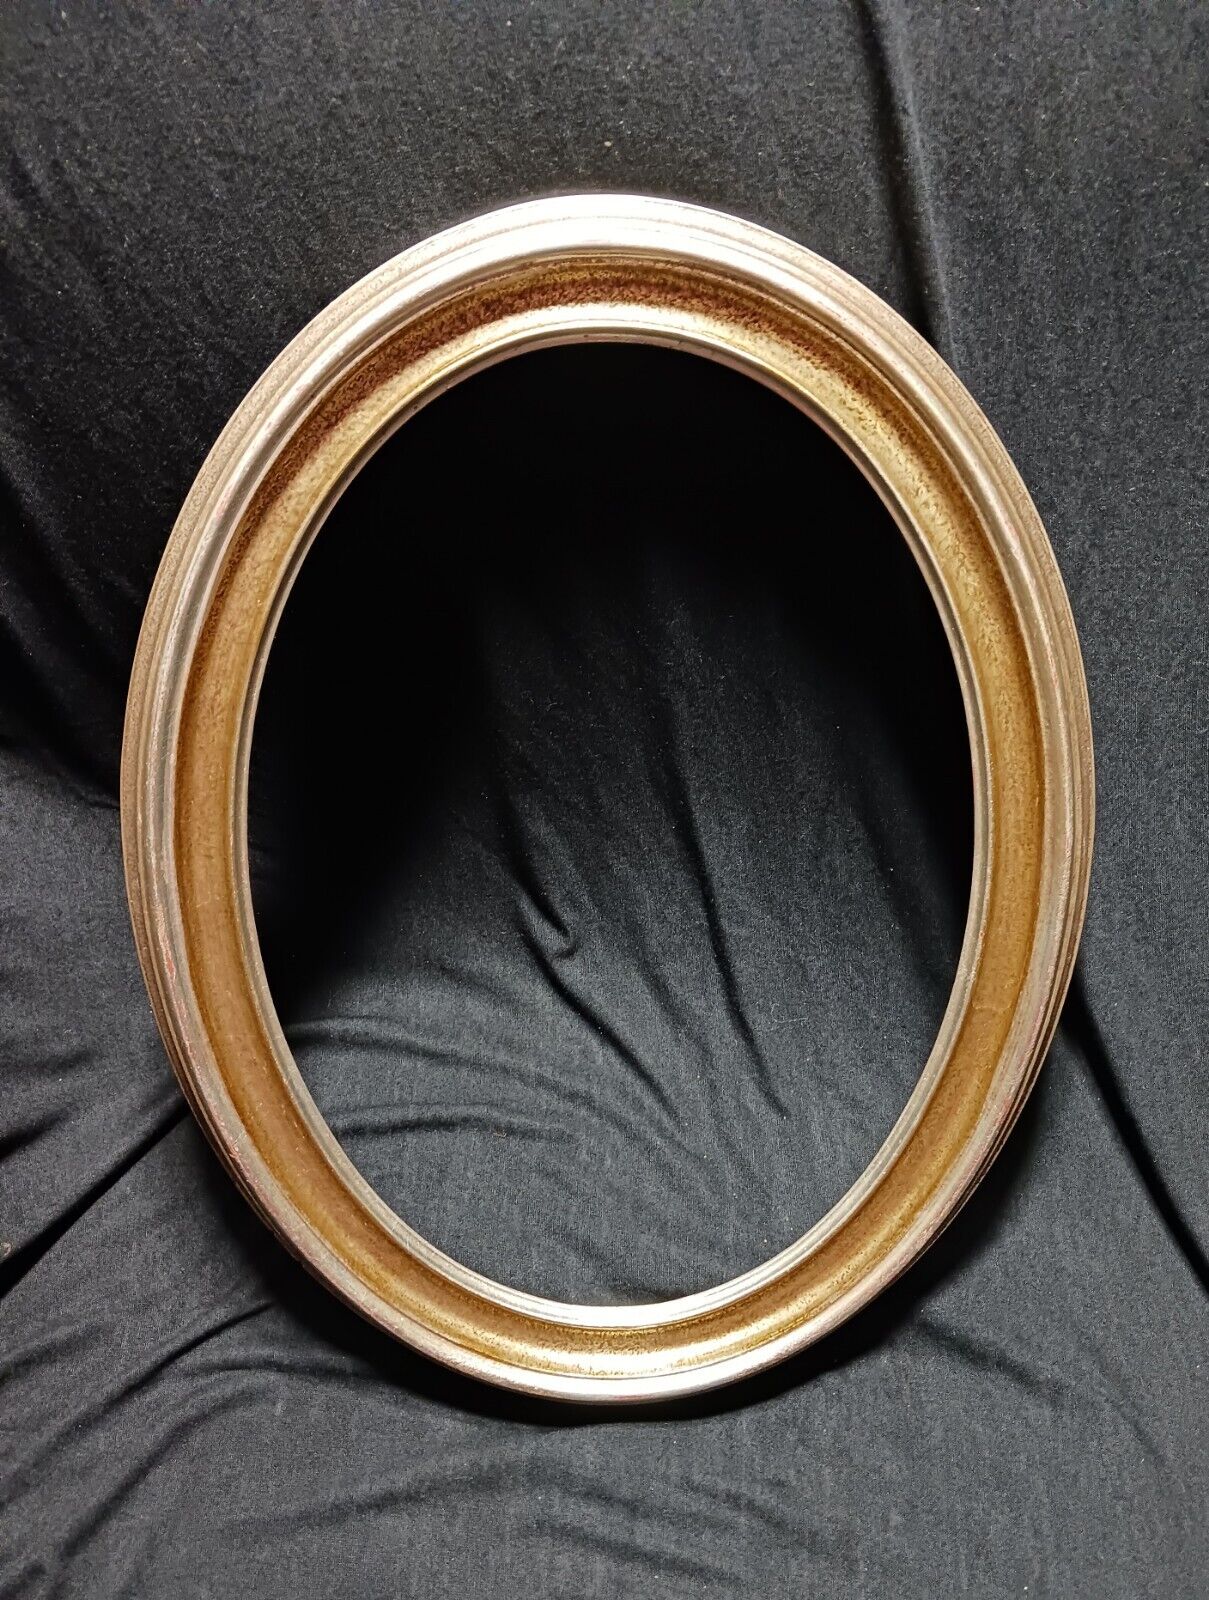  Picture Frame 9x12 Oval by Magic Wood in Pewter Finish NEW